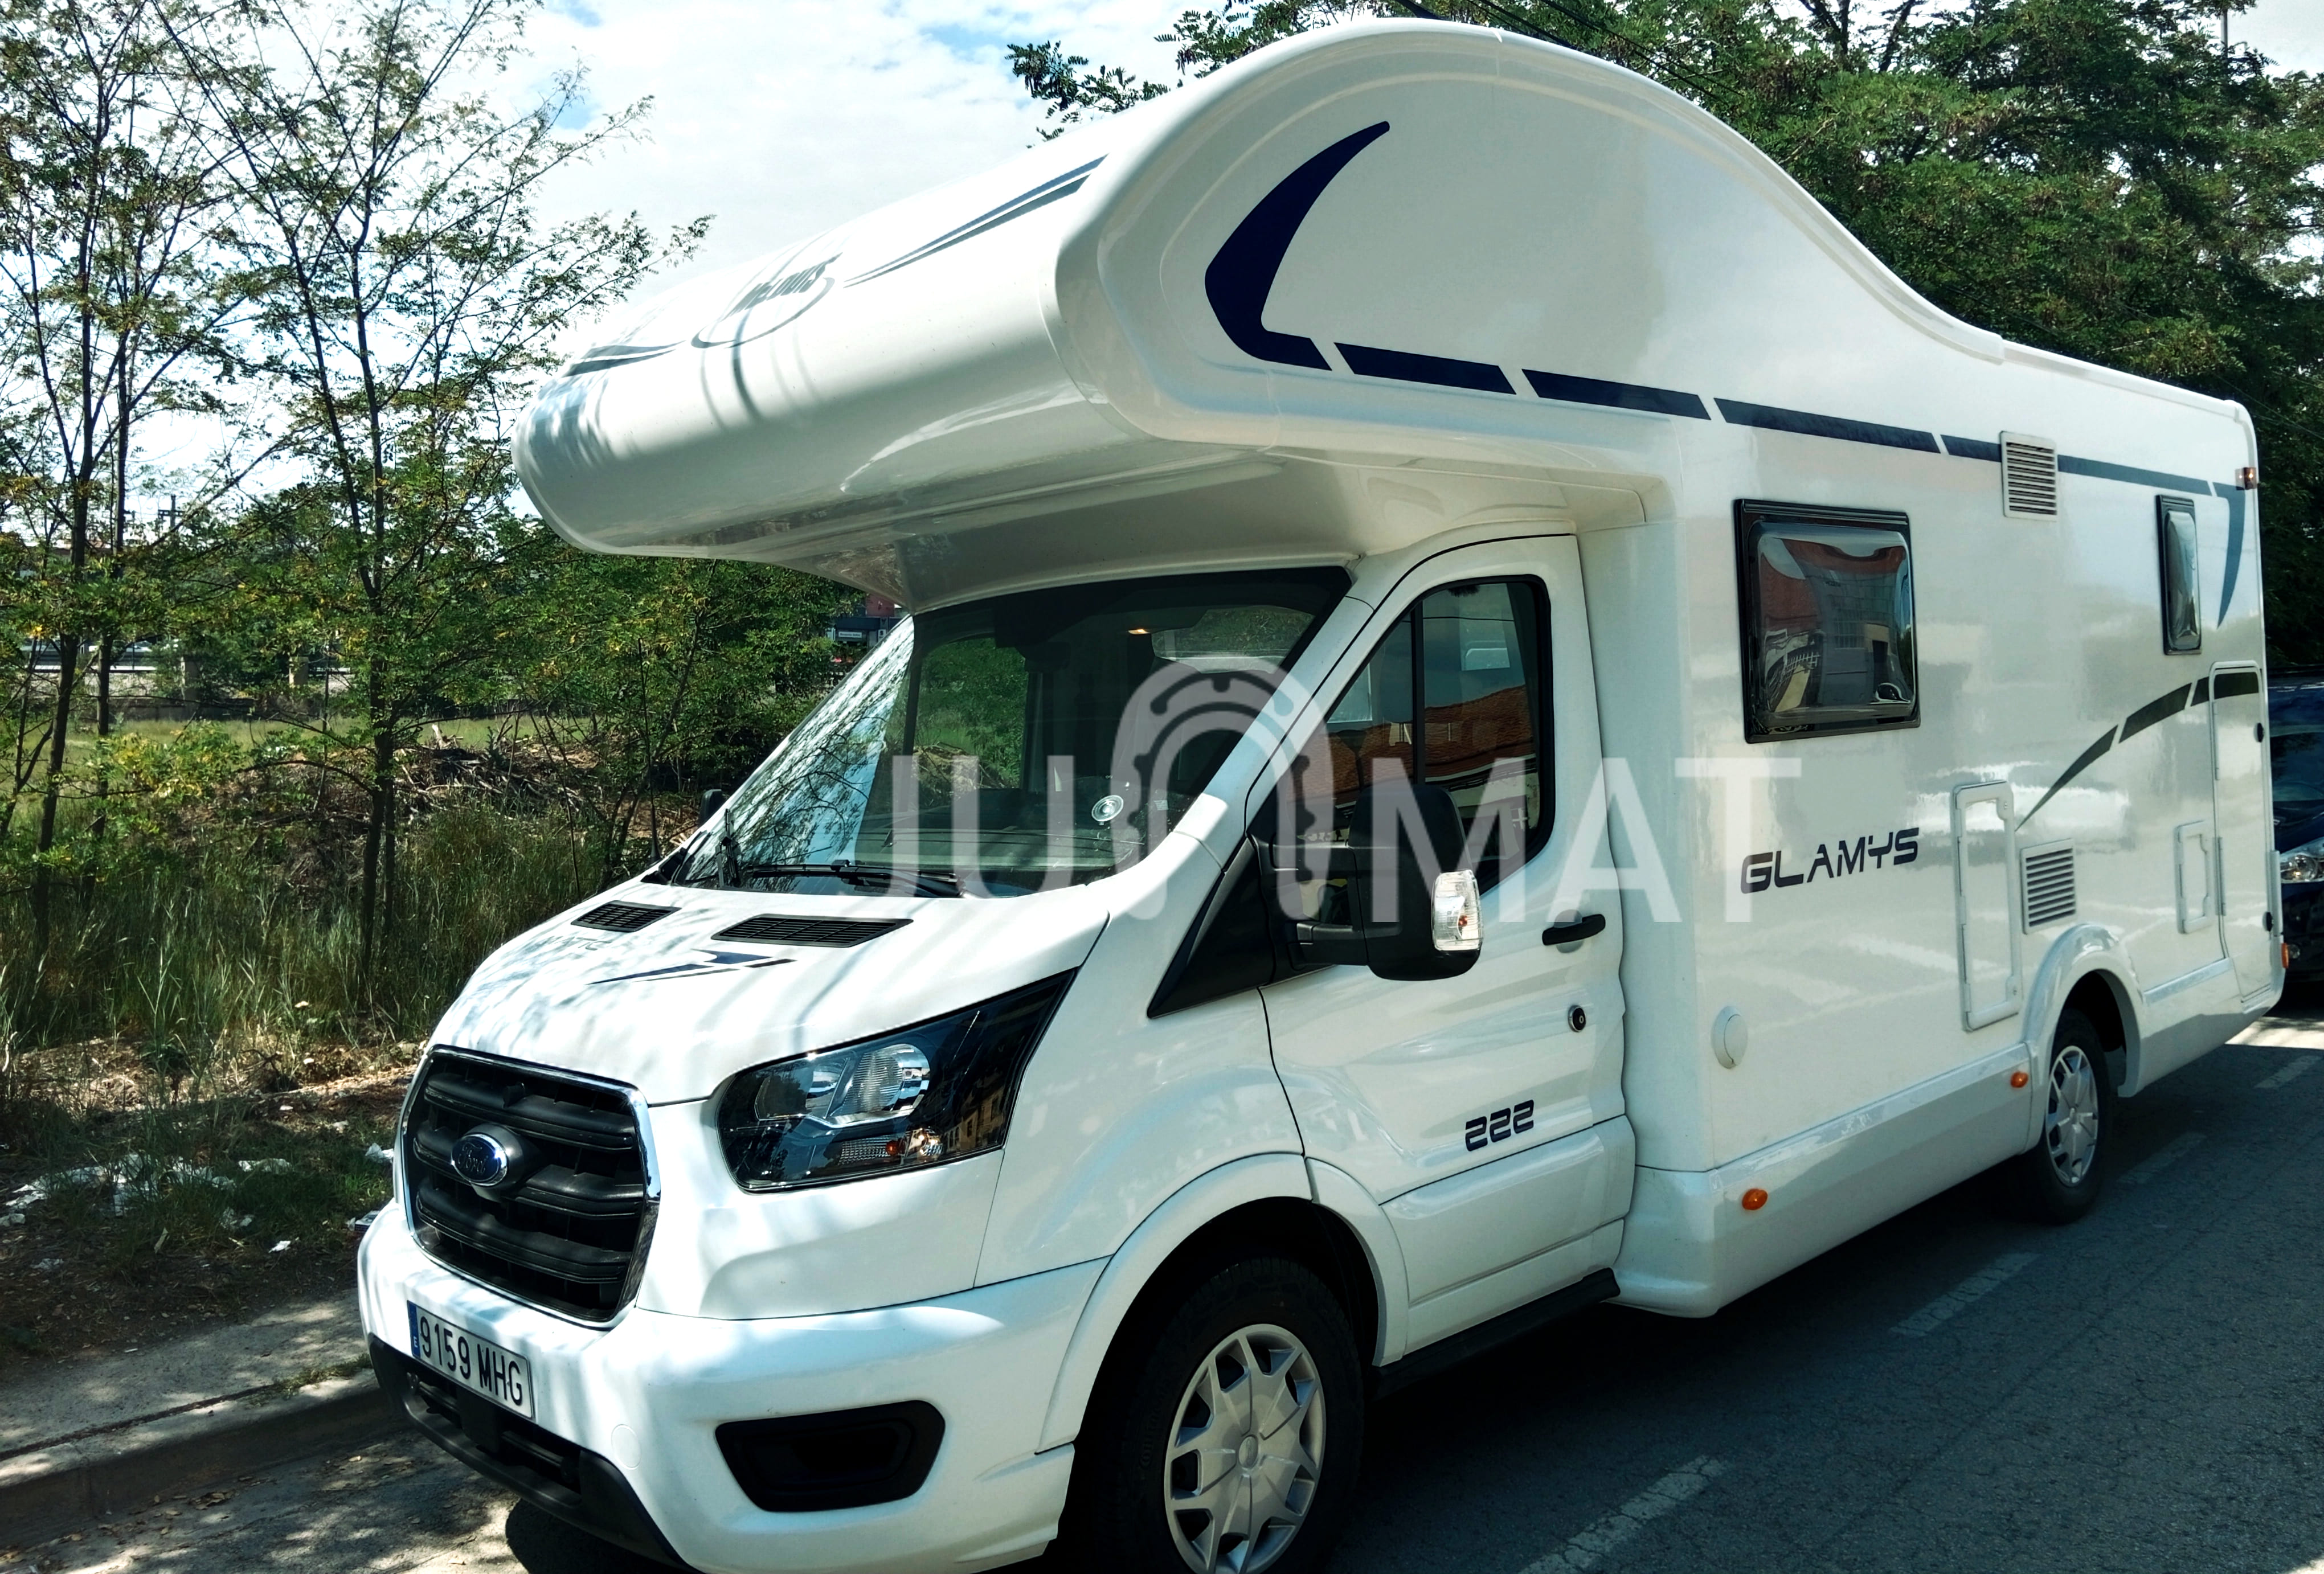 image of the exterior of the motorhome